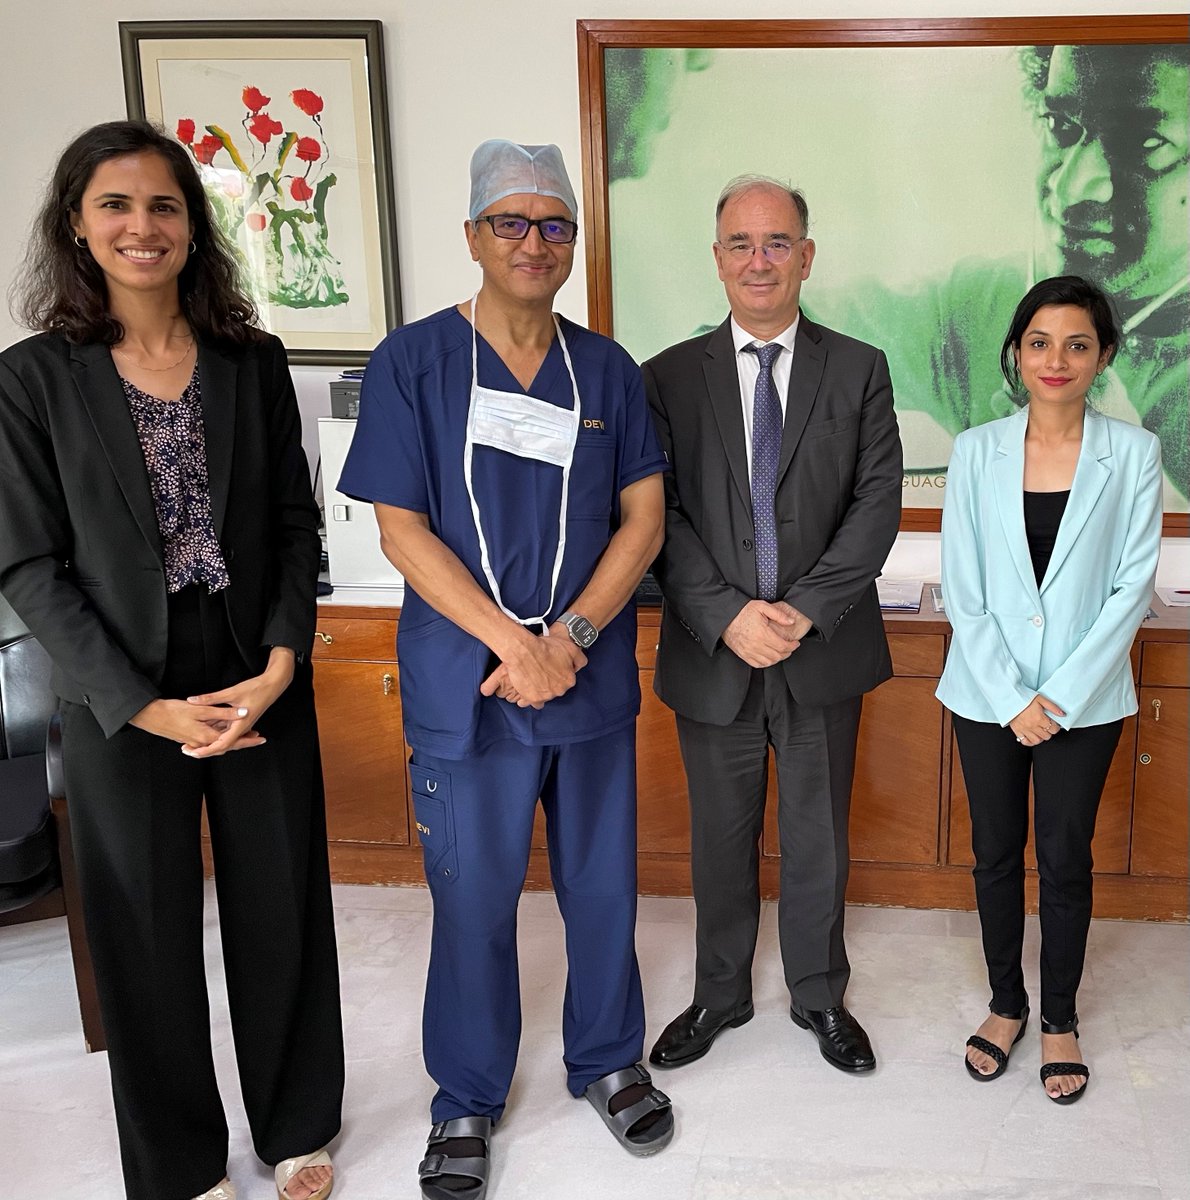 Dr Devi Shetty, famous #cardiologist, received the 🇫🇷 Consul General & team at @NarayanaHealth City #Bangalore. This allowed us to get a glimpse of his #philanthropy work when it comes to surgeries for the needy. Mr. Berthelot appreciated of the Founder's commitment.